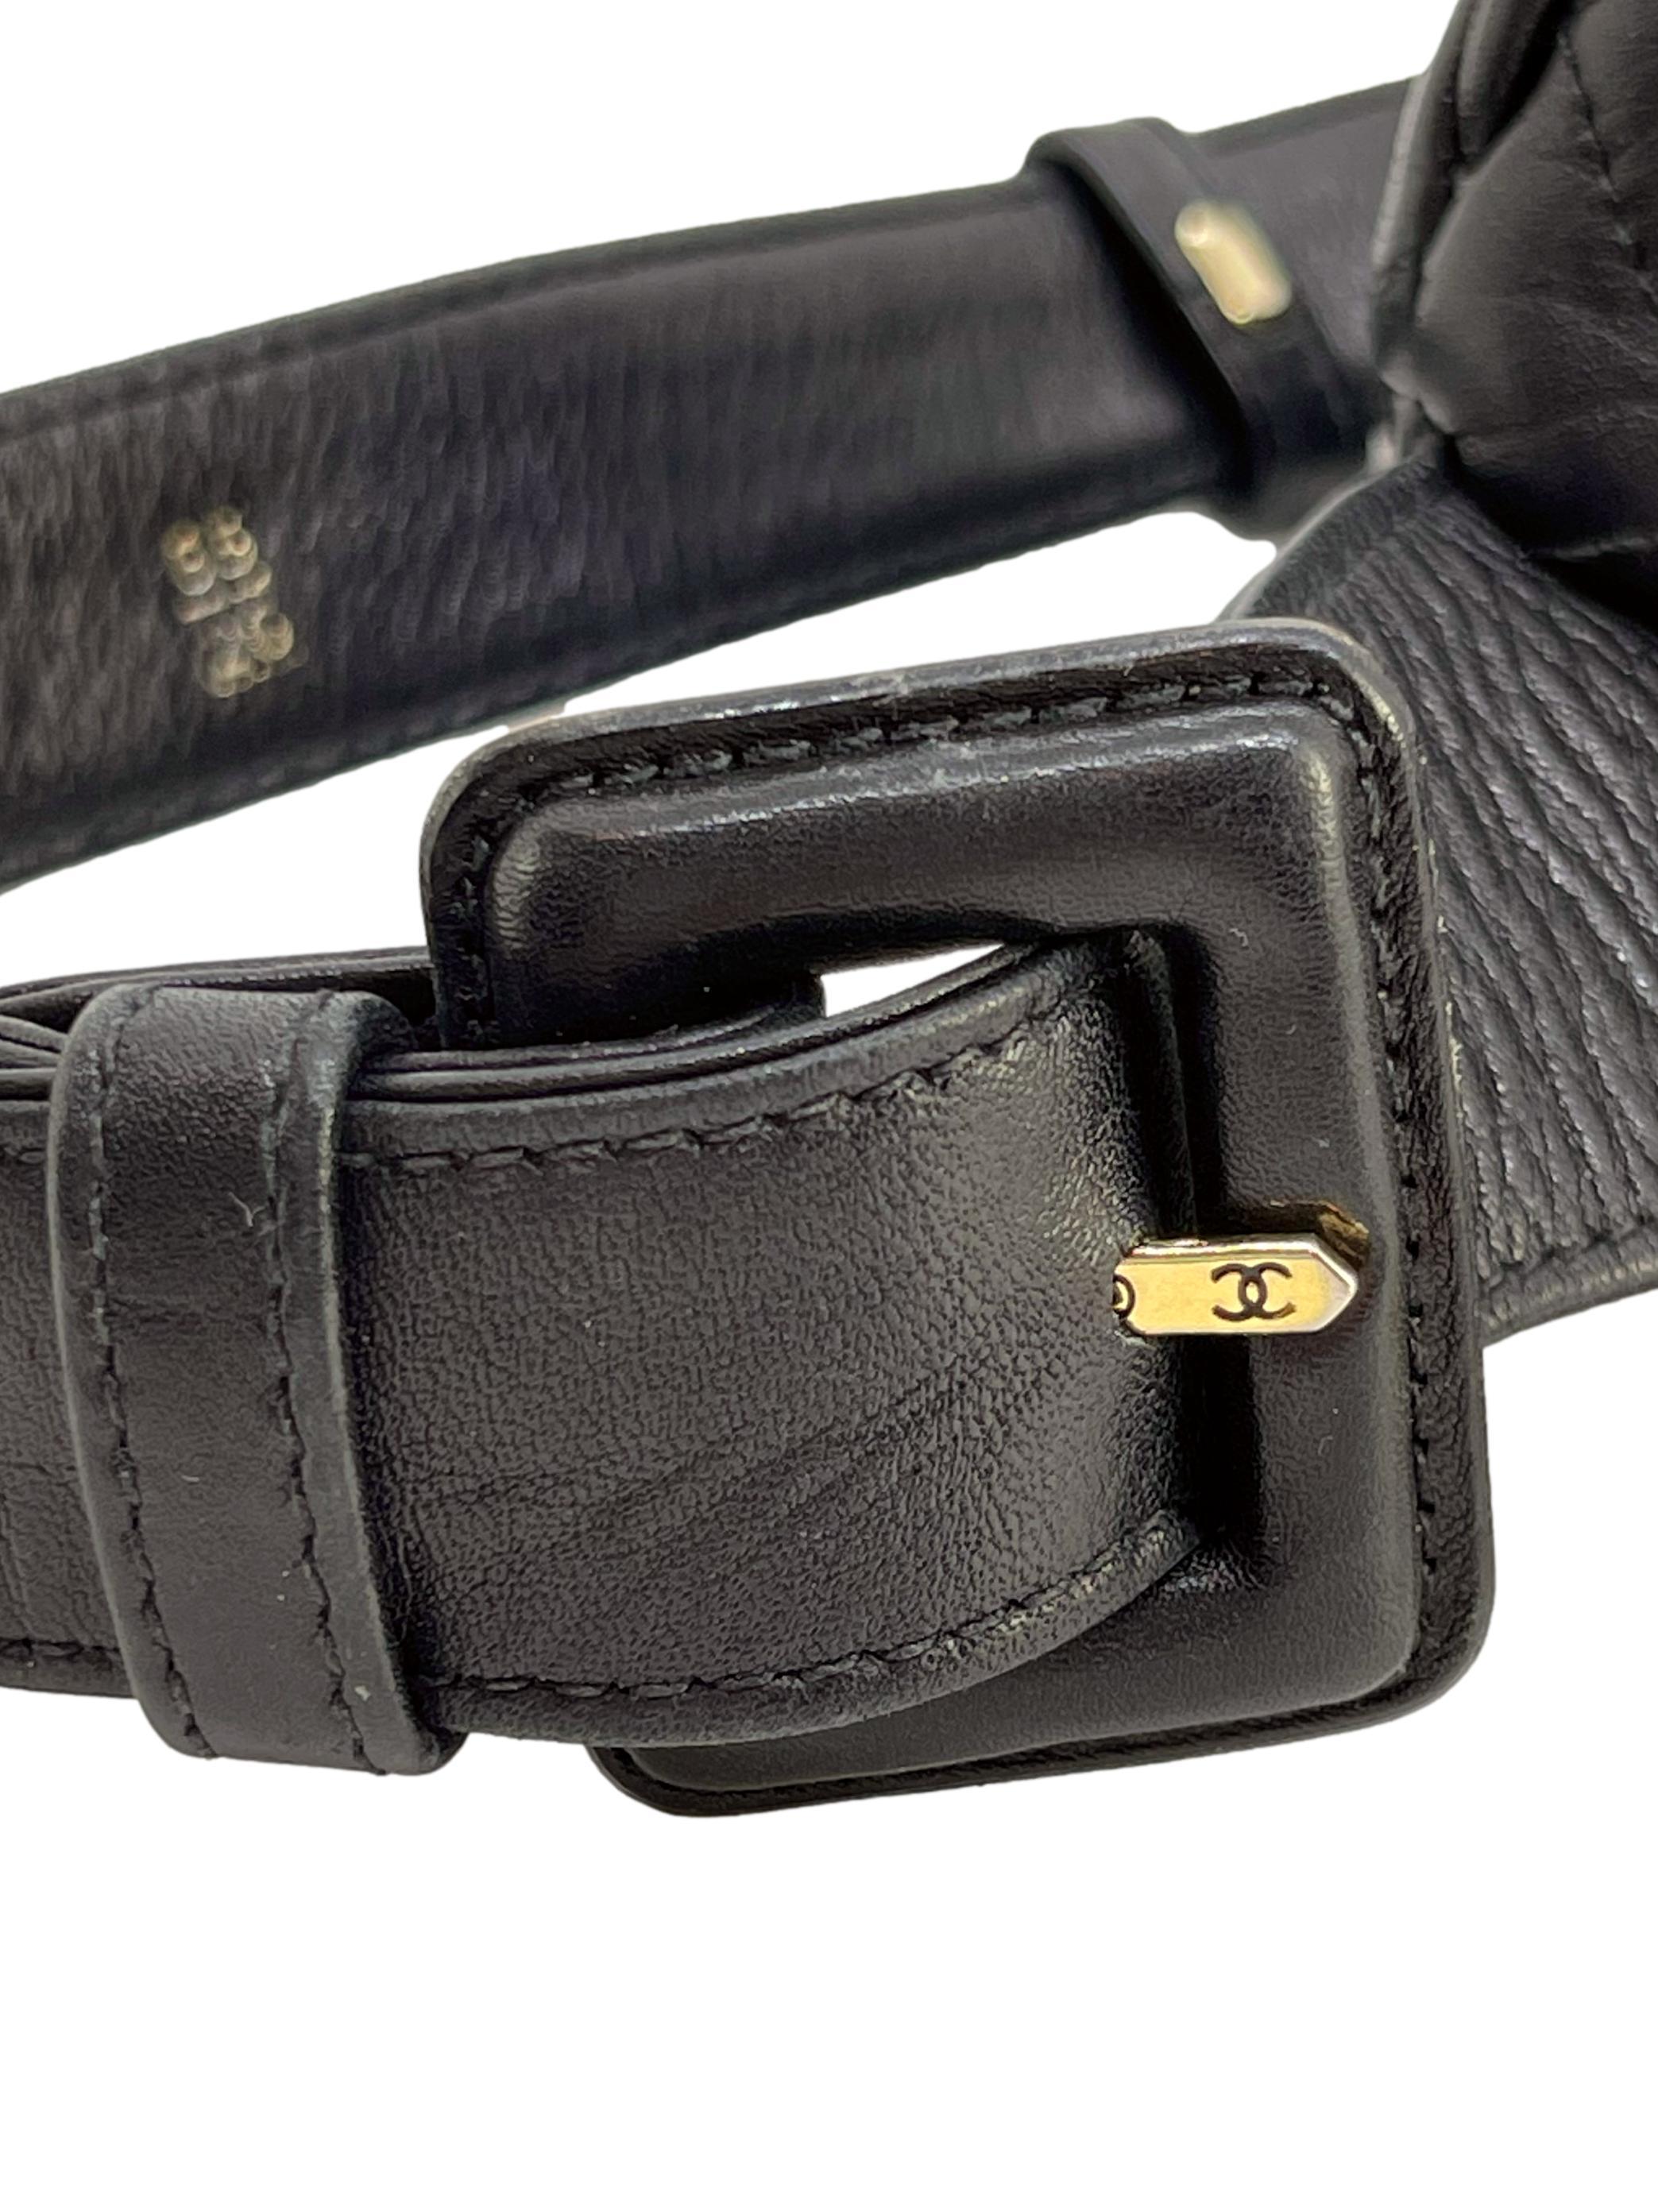 Chanel Quilted Lambskin Waist Belt Bum Bag with Gold Hardware, 1985. 7